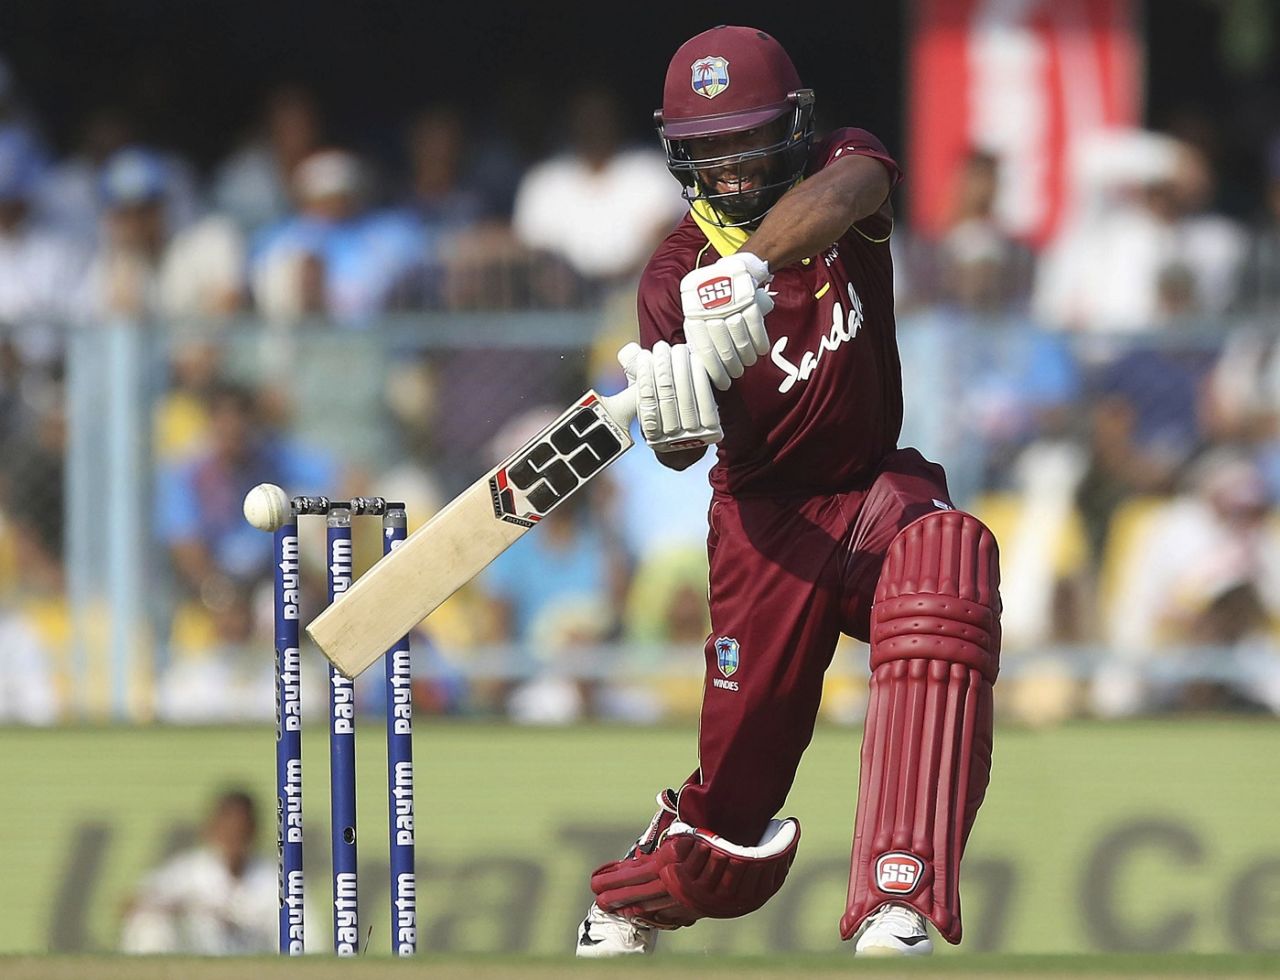 Shai Hope prepares to hit the ball, India v West Indies, 1st ODI, Guwahati, October 21, 2018